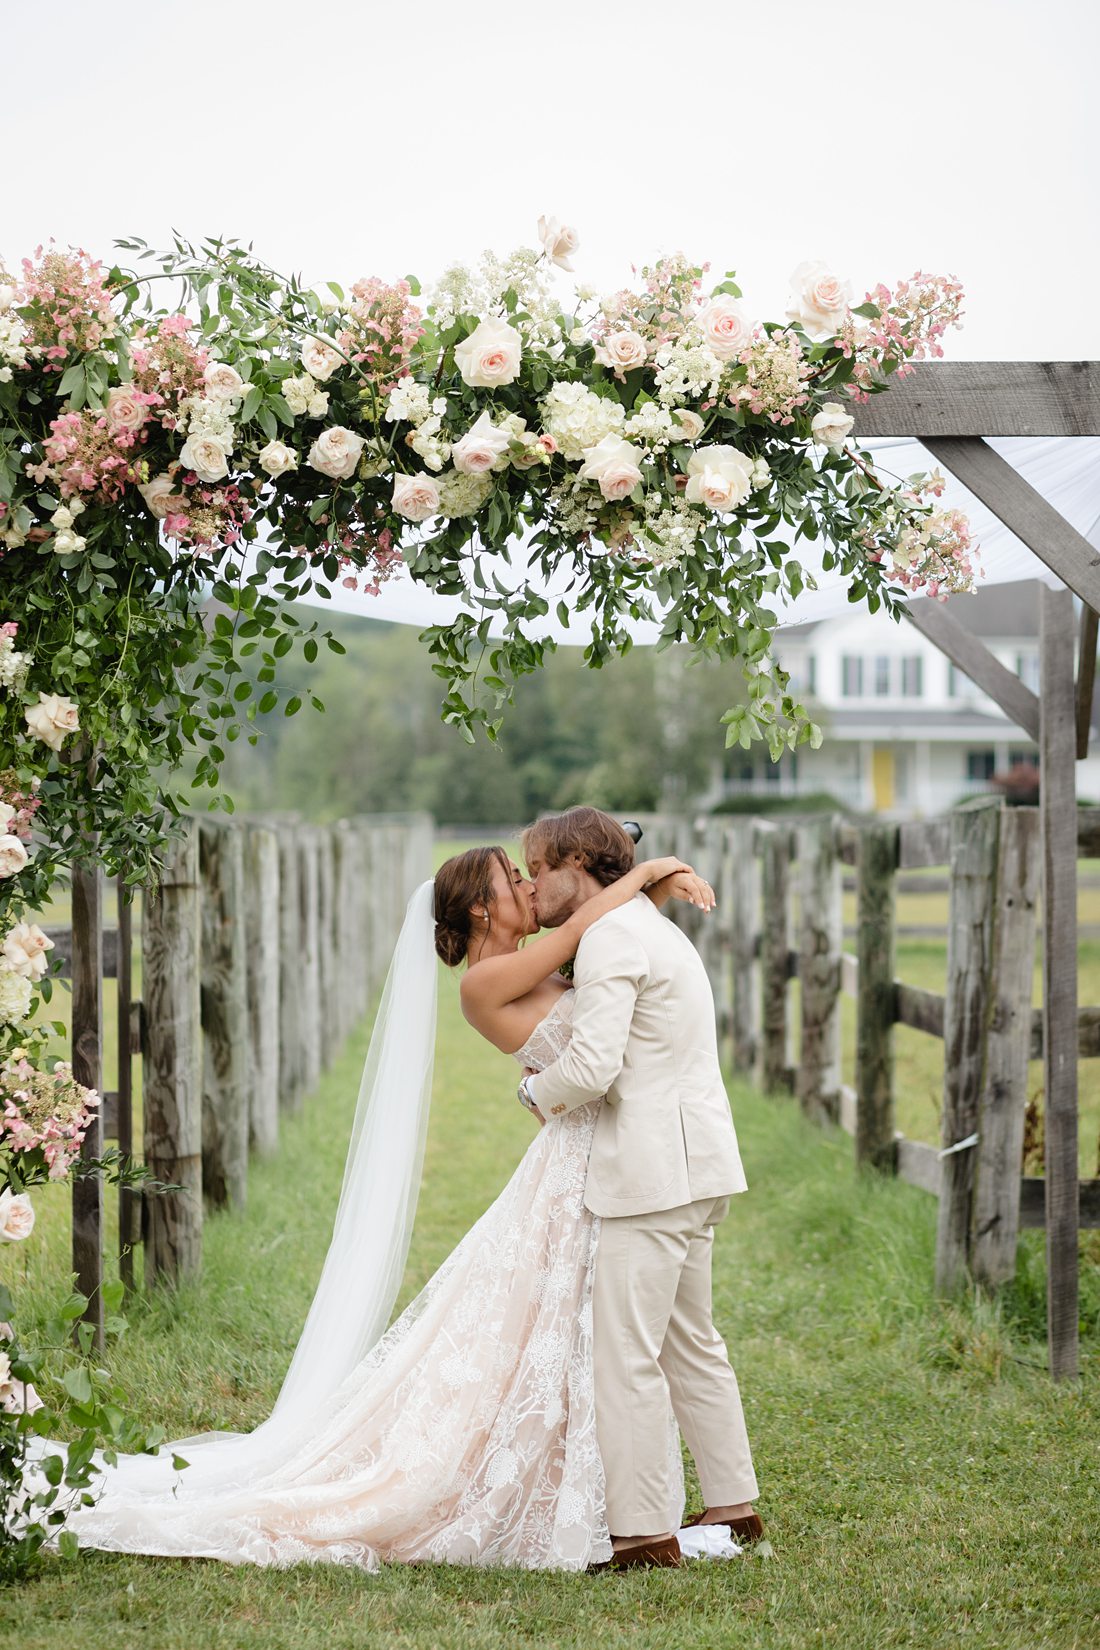 First kiss as a husband and wife at Oz Farm NY